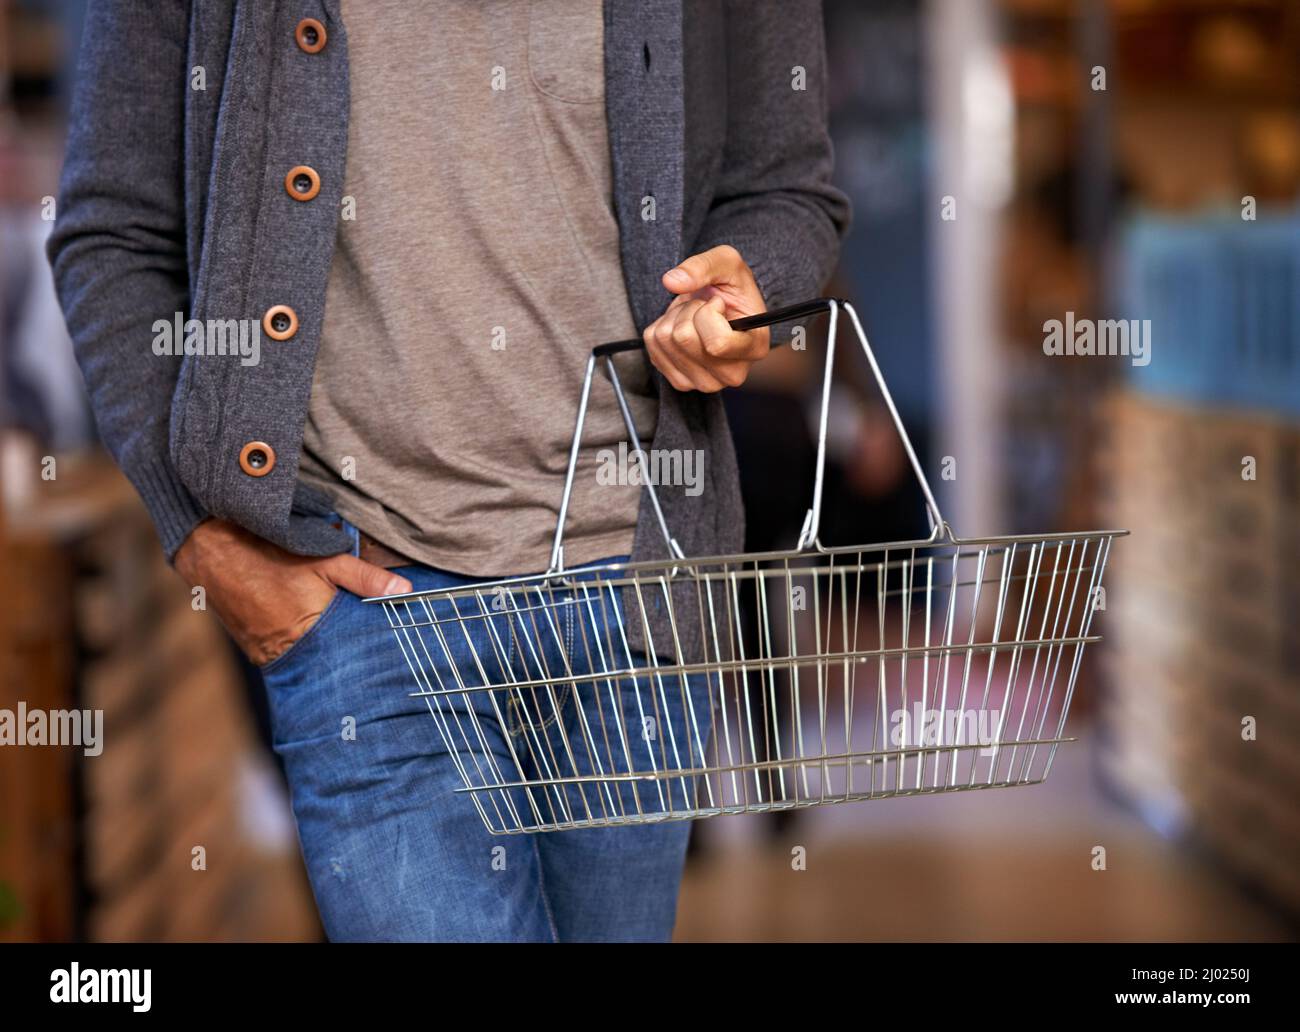 Time for this weeks shopping. Cropped shot of a young man carrying a shopping basket and walking in a grocery store. Stock Photo